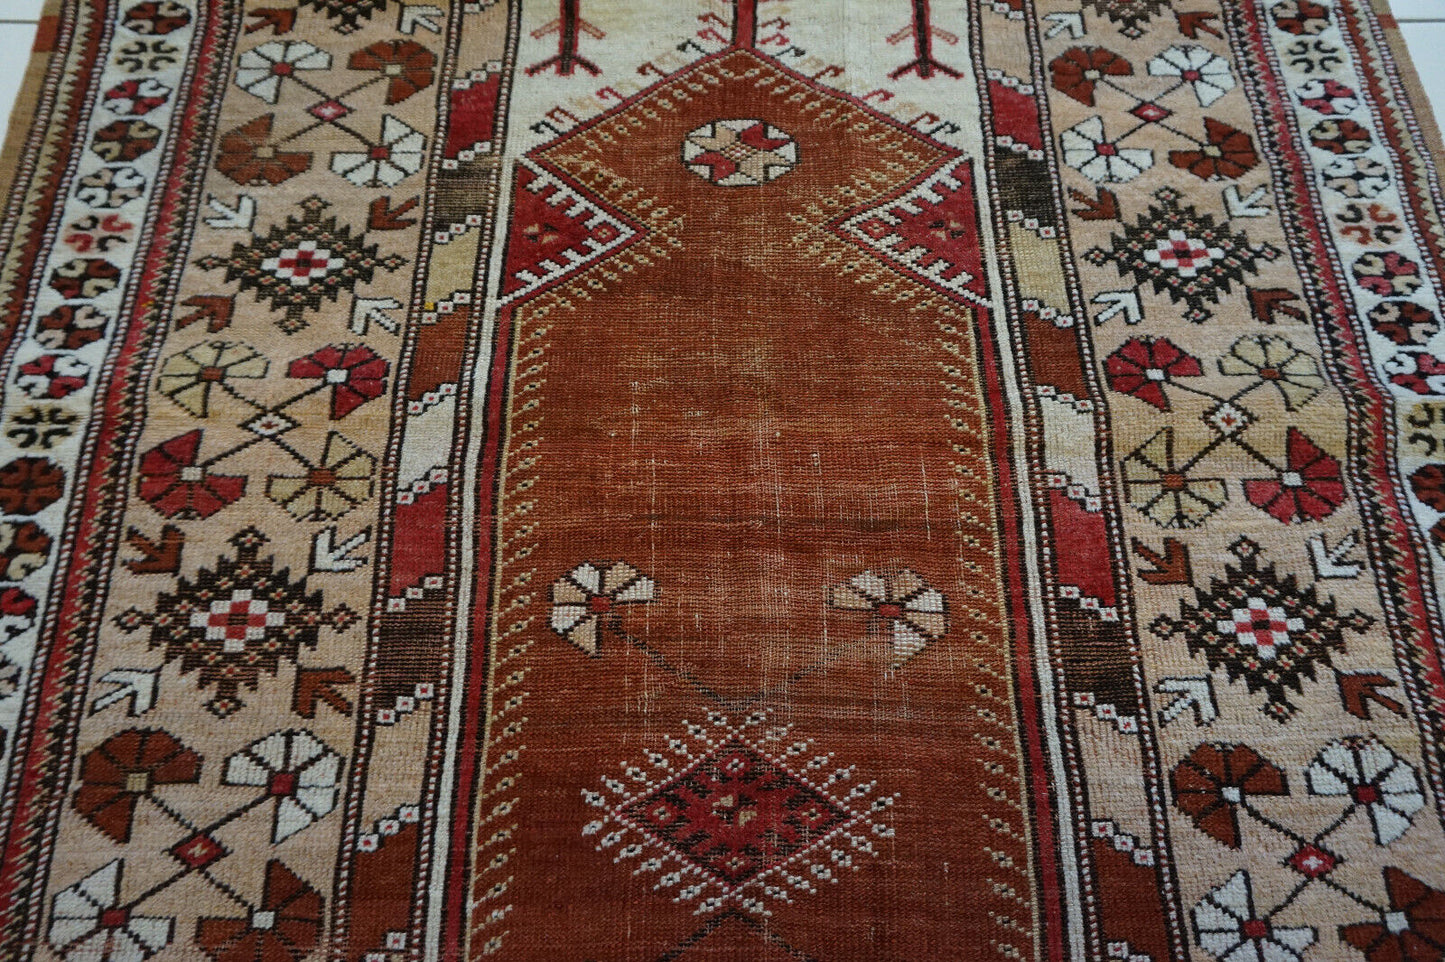 Close-up of the warm, earthy primary color on the Handmade Traditional Turkish Melas Rug